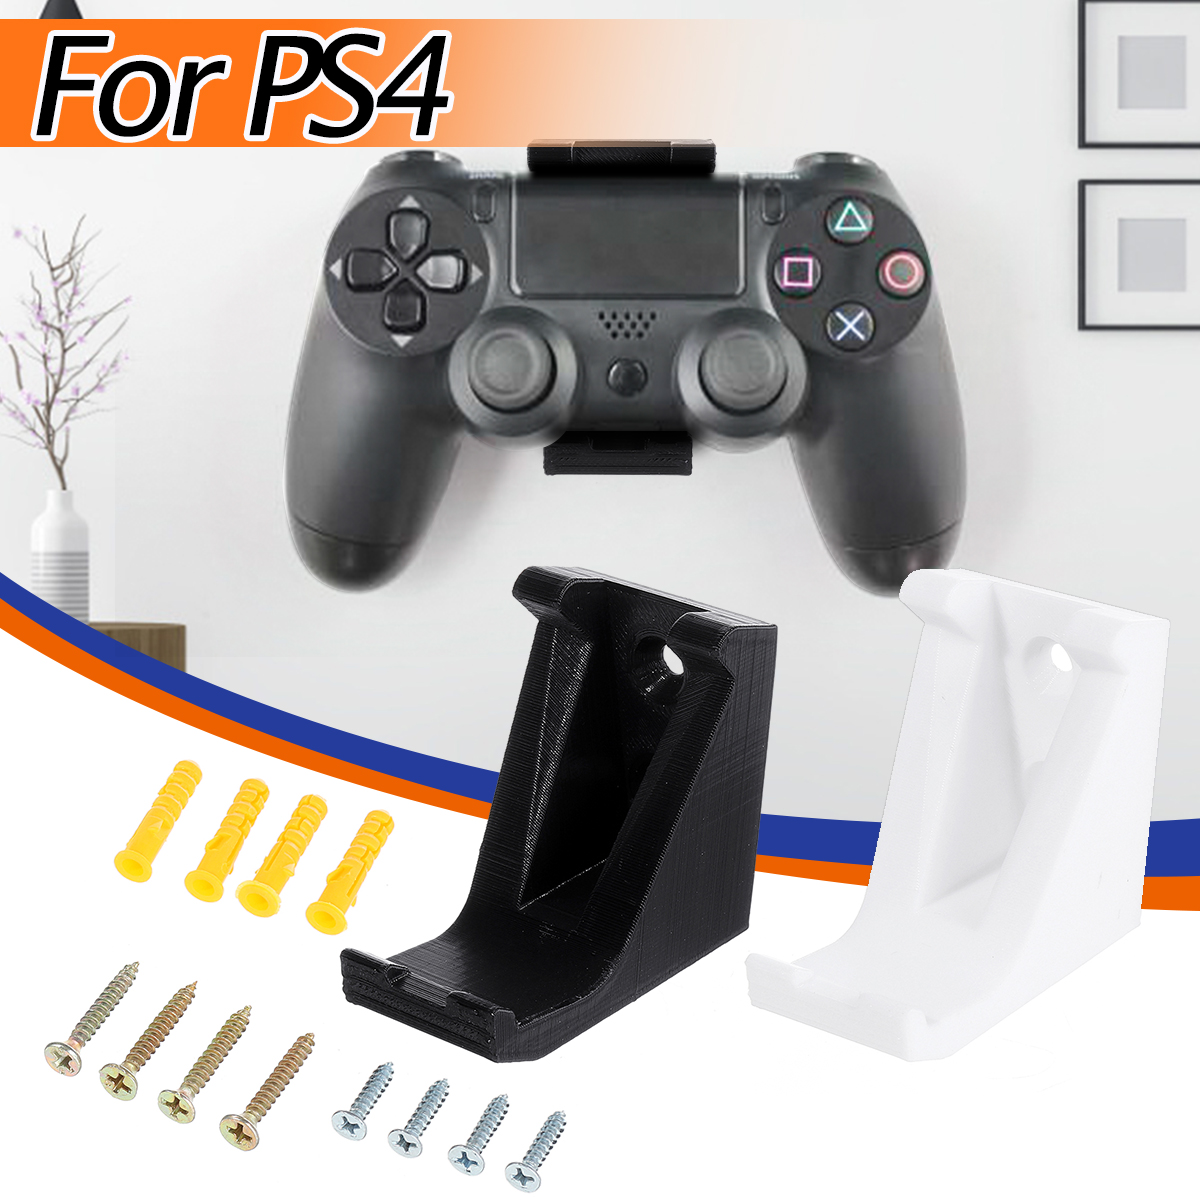 Wall Holder Dock Gamepad Stand Screws for Playstation 4 PS4 Game Controller 37